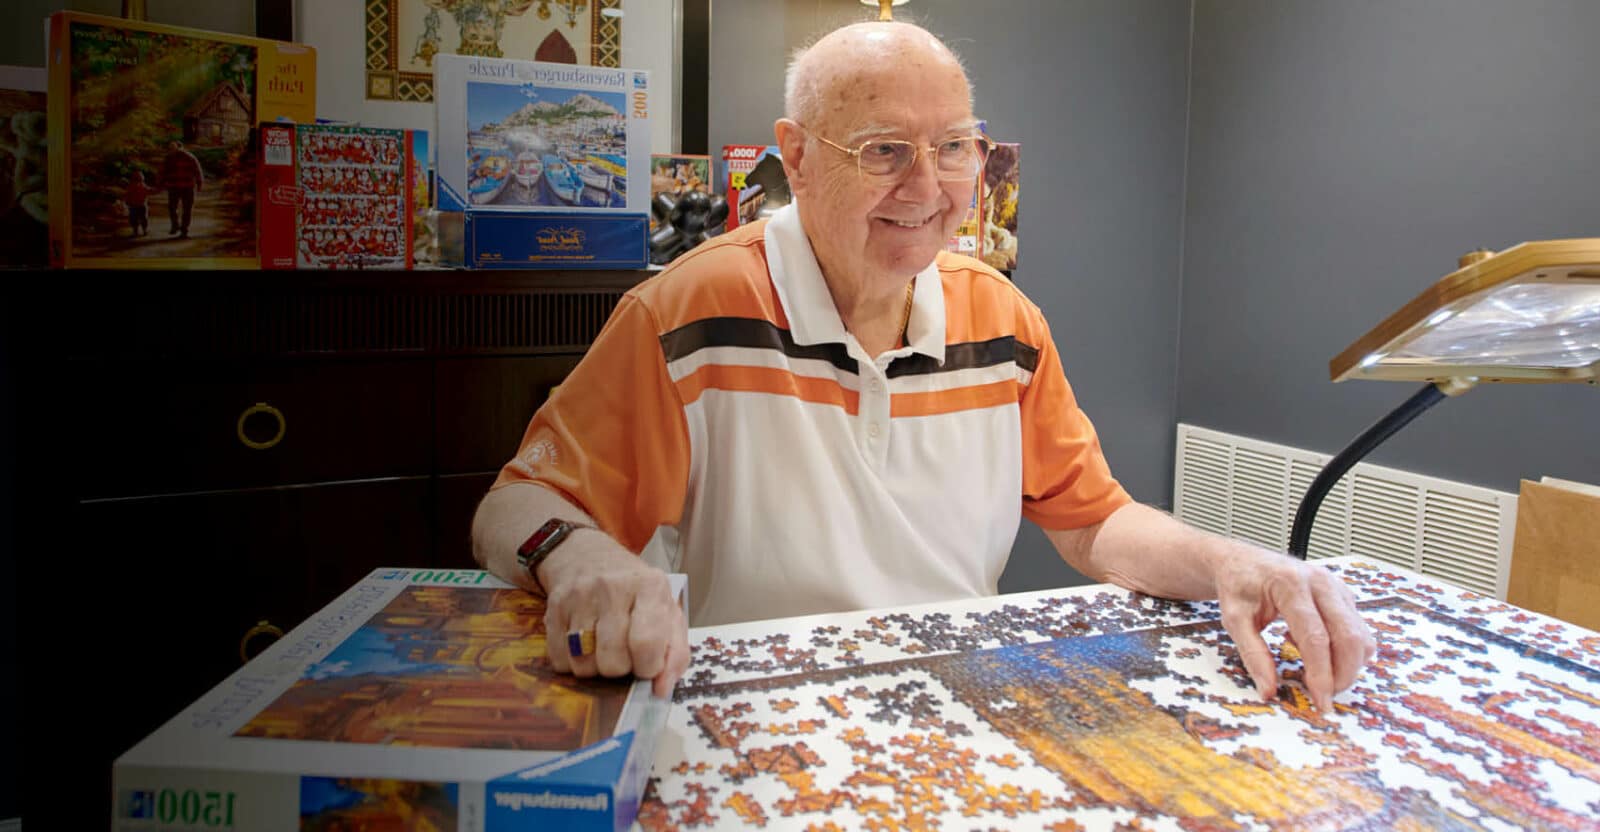 man working on a jigsaw puzzle at a table